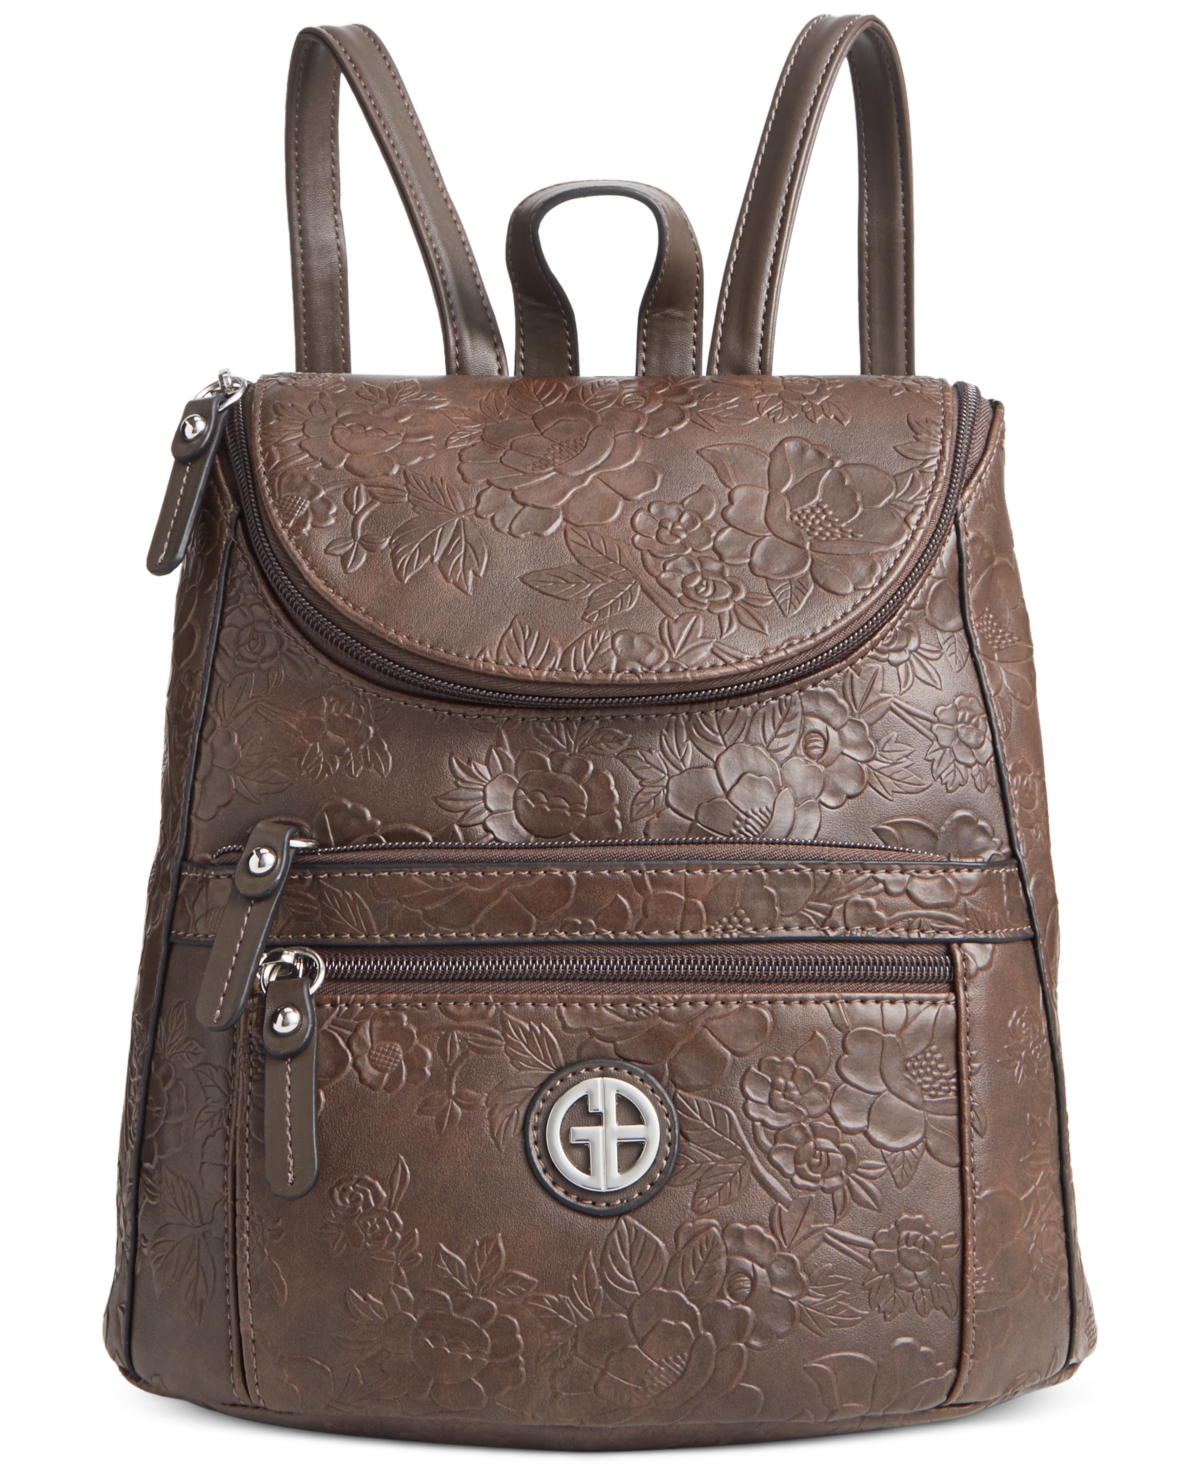 Pebble Tooling Backpack, Created for Macy's - Chocolate